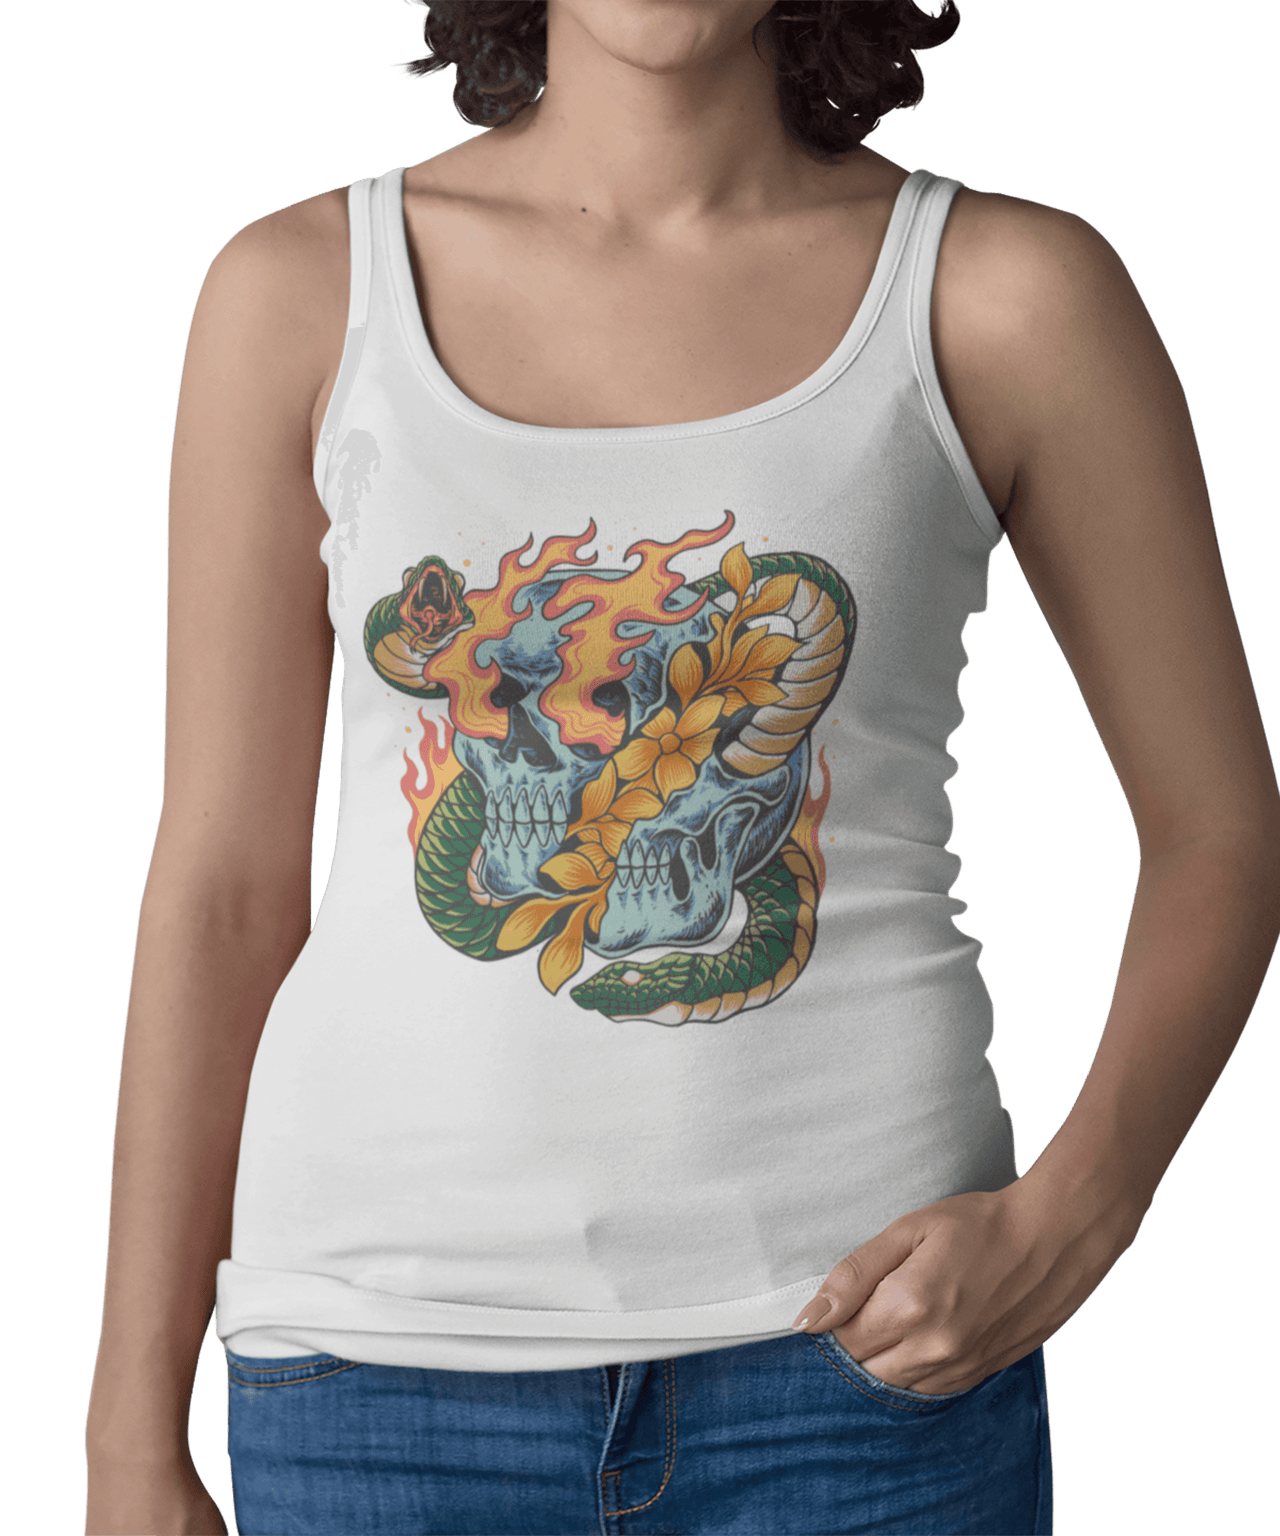 Snake and Skull Tattoo Design Adult Womens Vest Top 8Ball